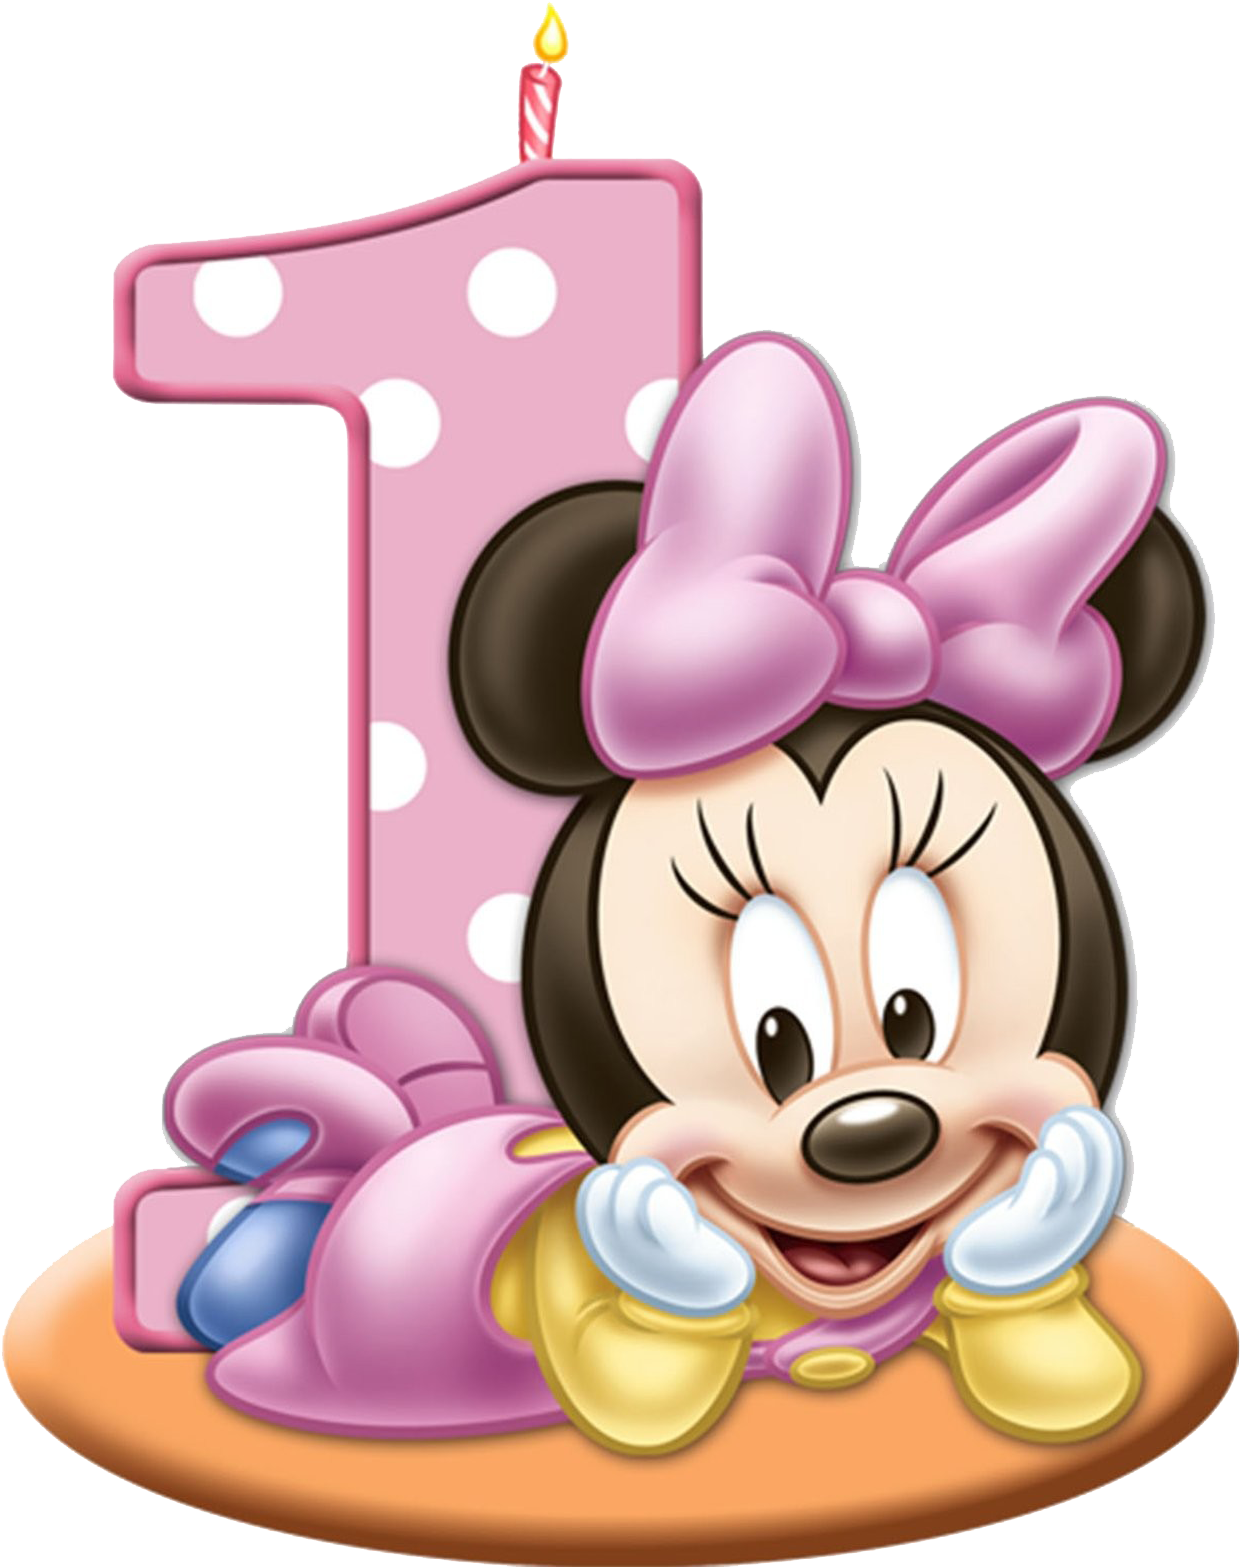 Cartoon Character Of A Mouse With A Pink Polka Dot Dress And A Number One